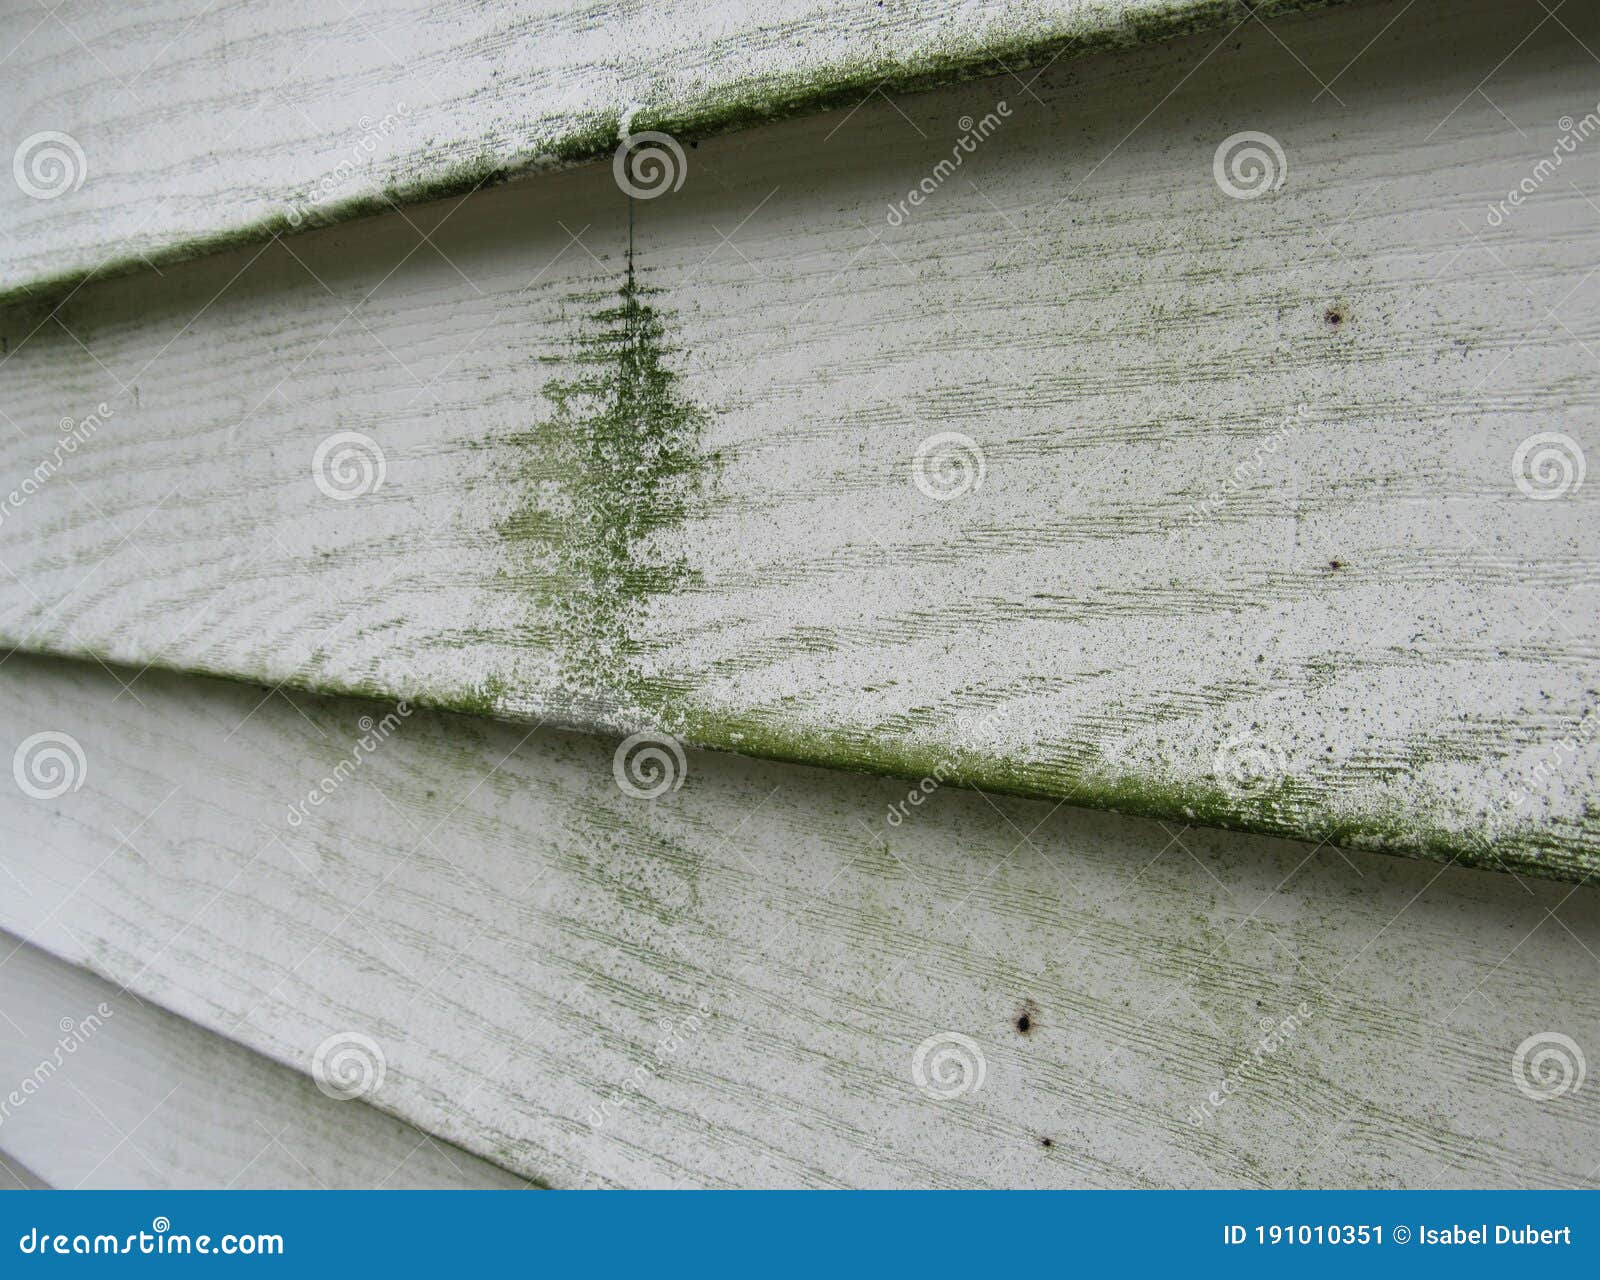 mold and mildew on the siding of a house